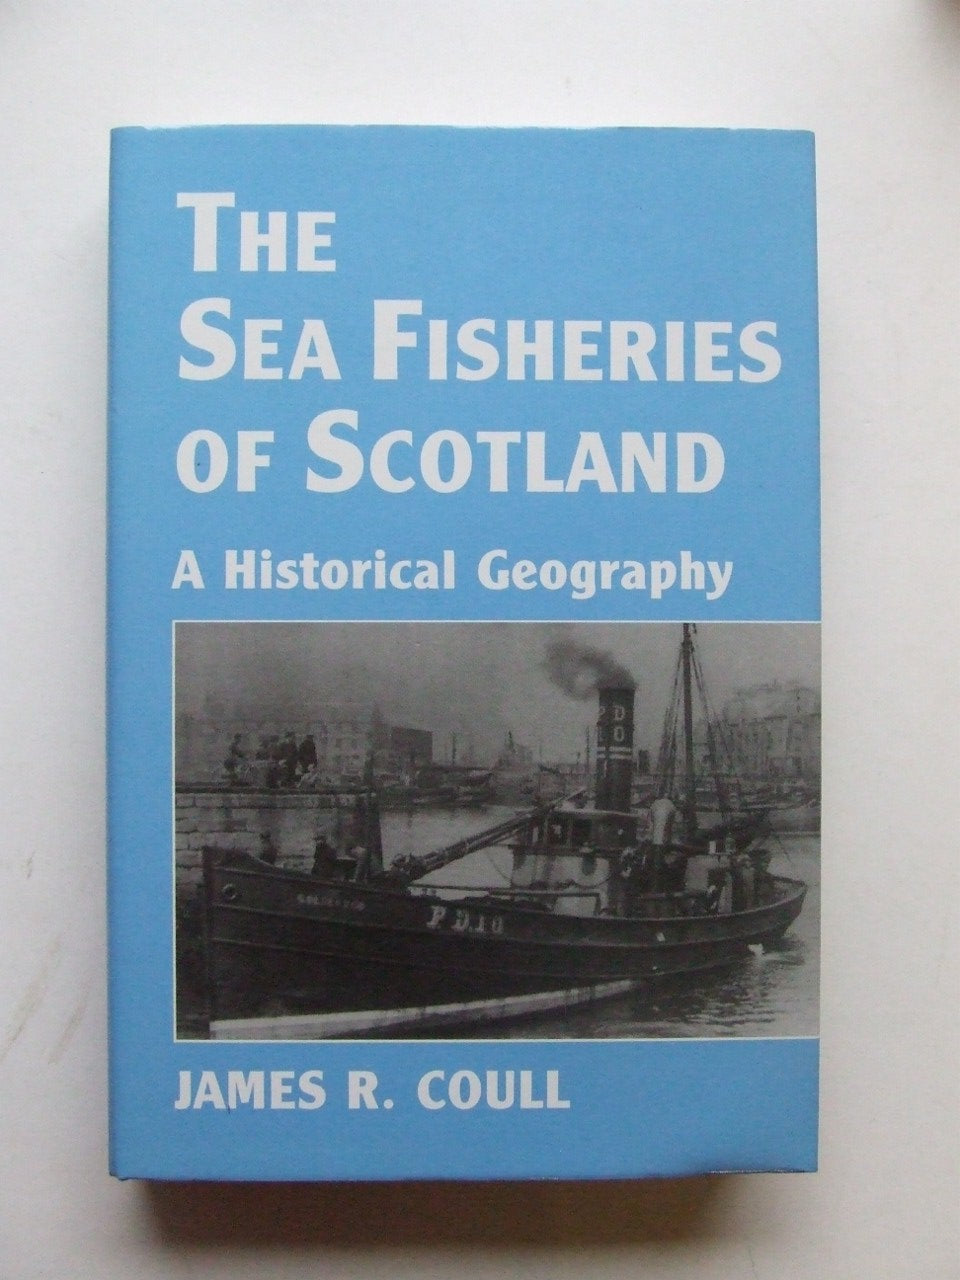 The Sea Fisheries of Scotland, a historical geography